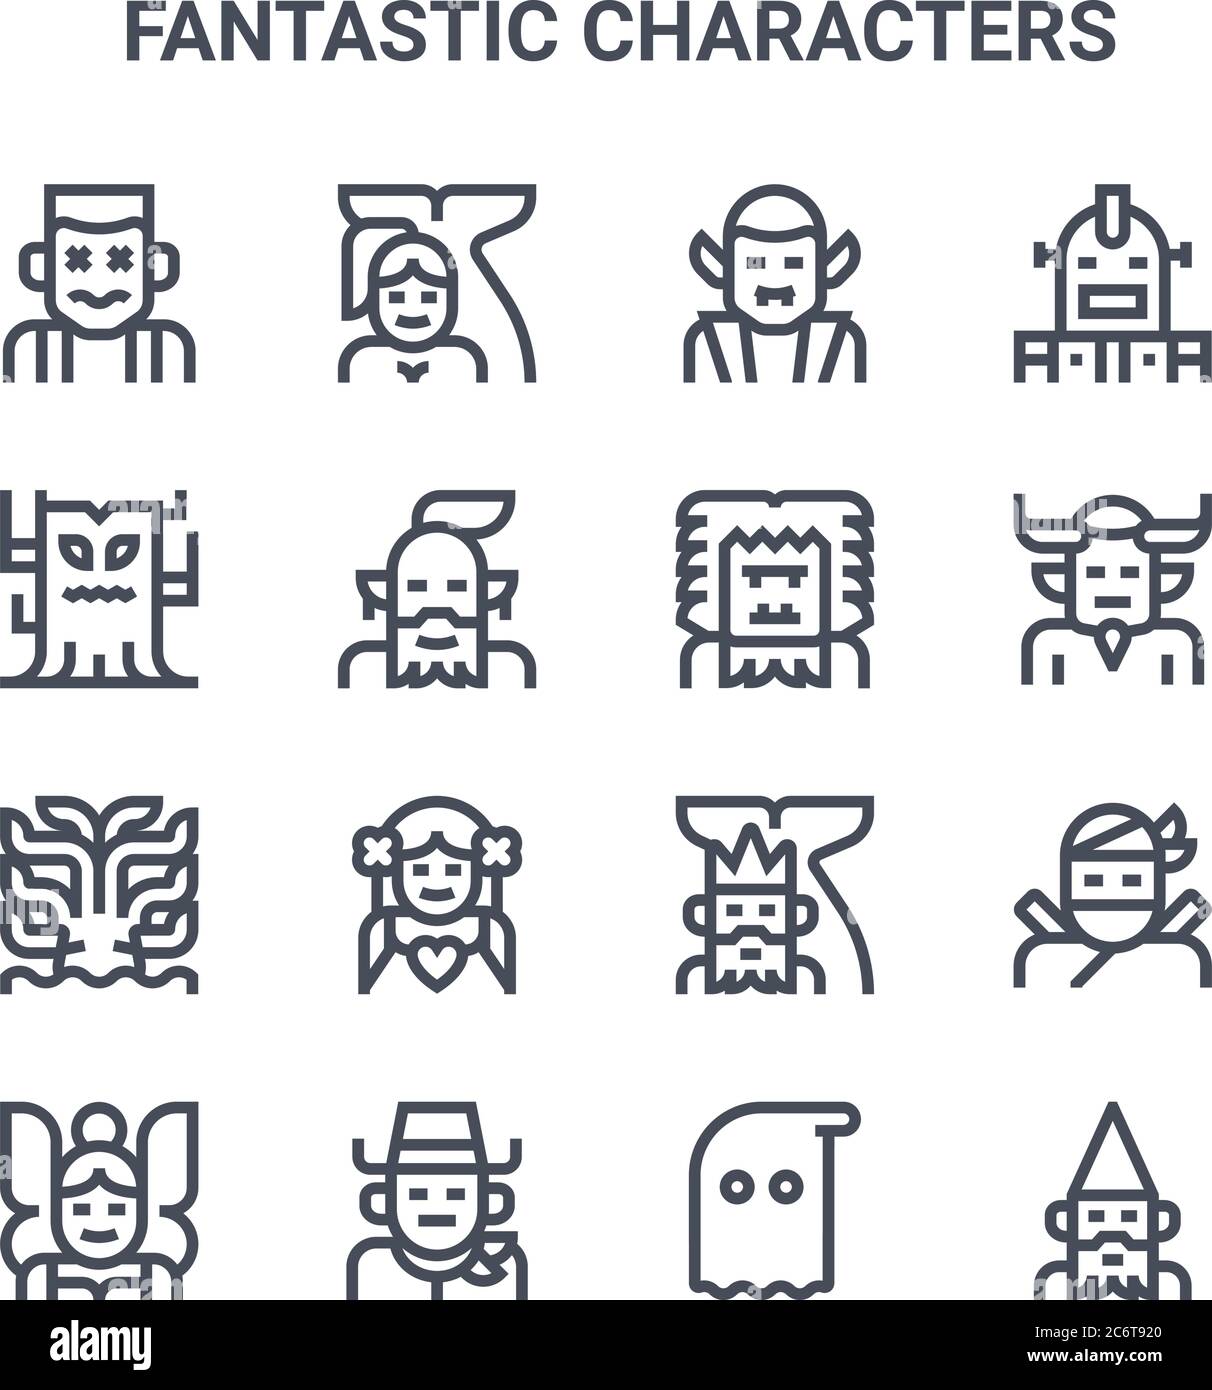 set of 16 fantastic characters concept vector line icons. 64x64 thin stroke icons such as mermaid, tree, demon, poseidon, cowboy, gnome, ghost, yeti, Stock Vector